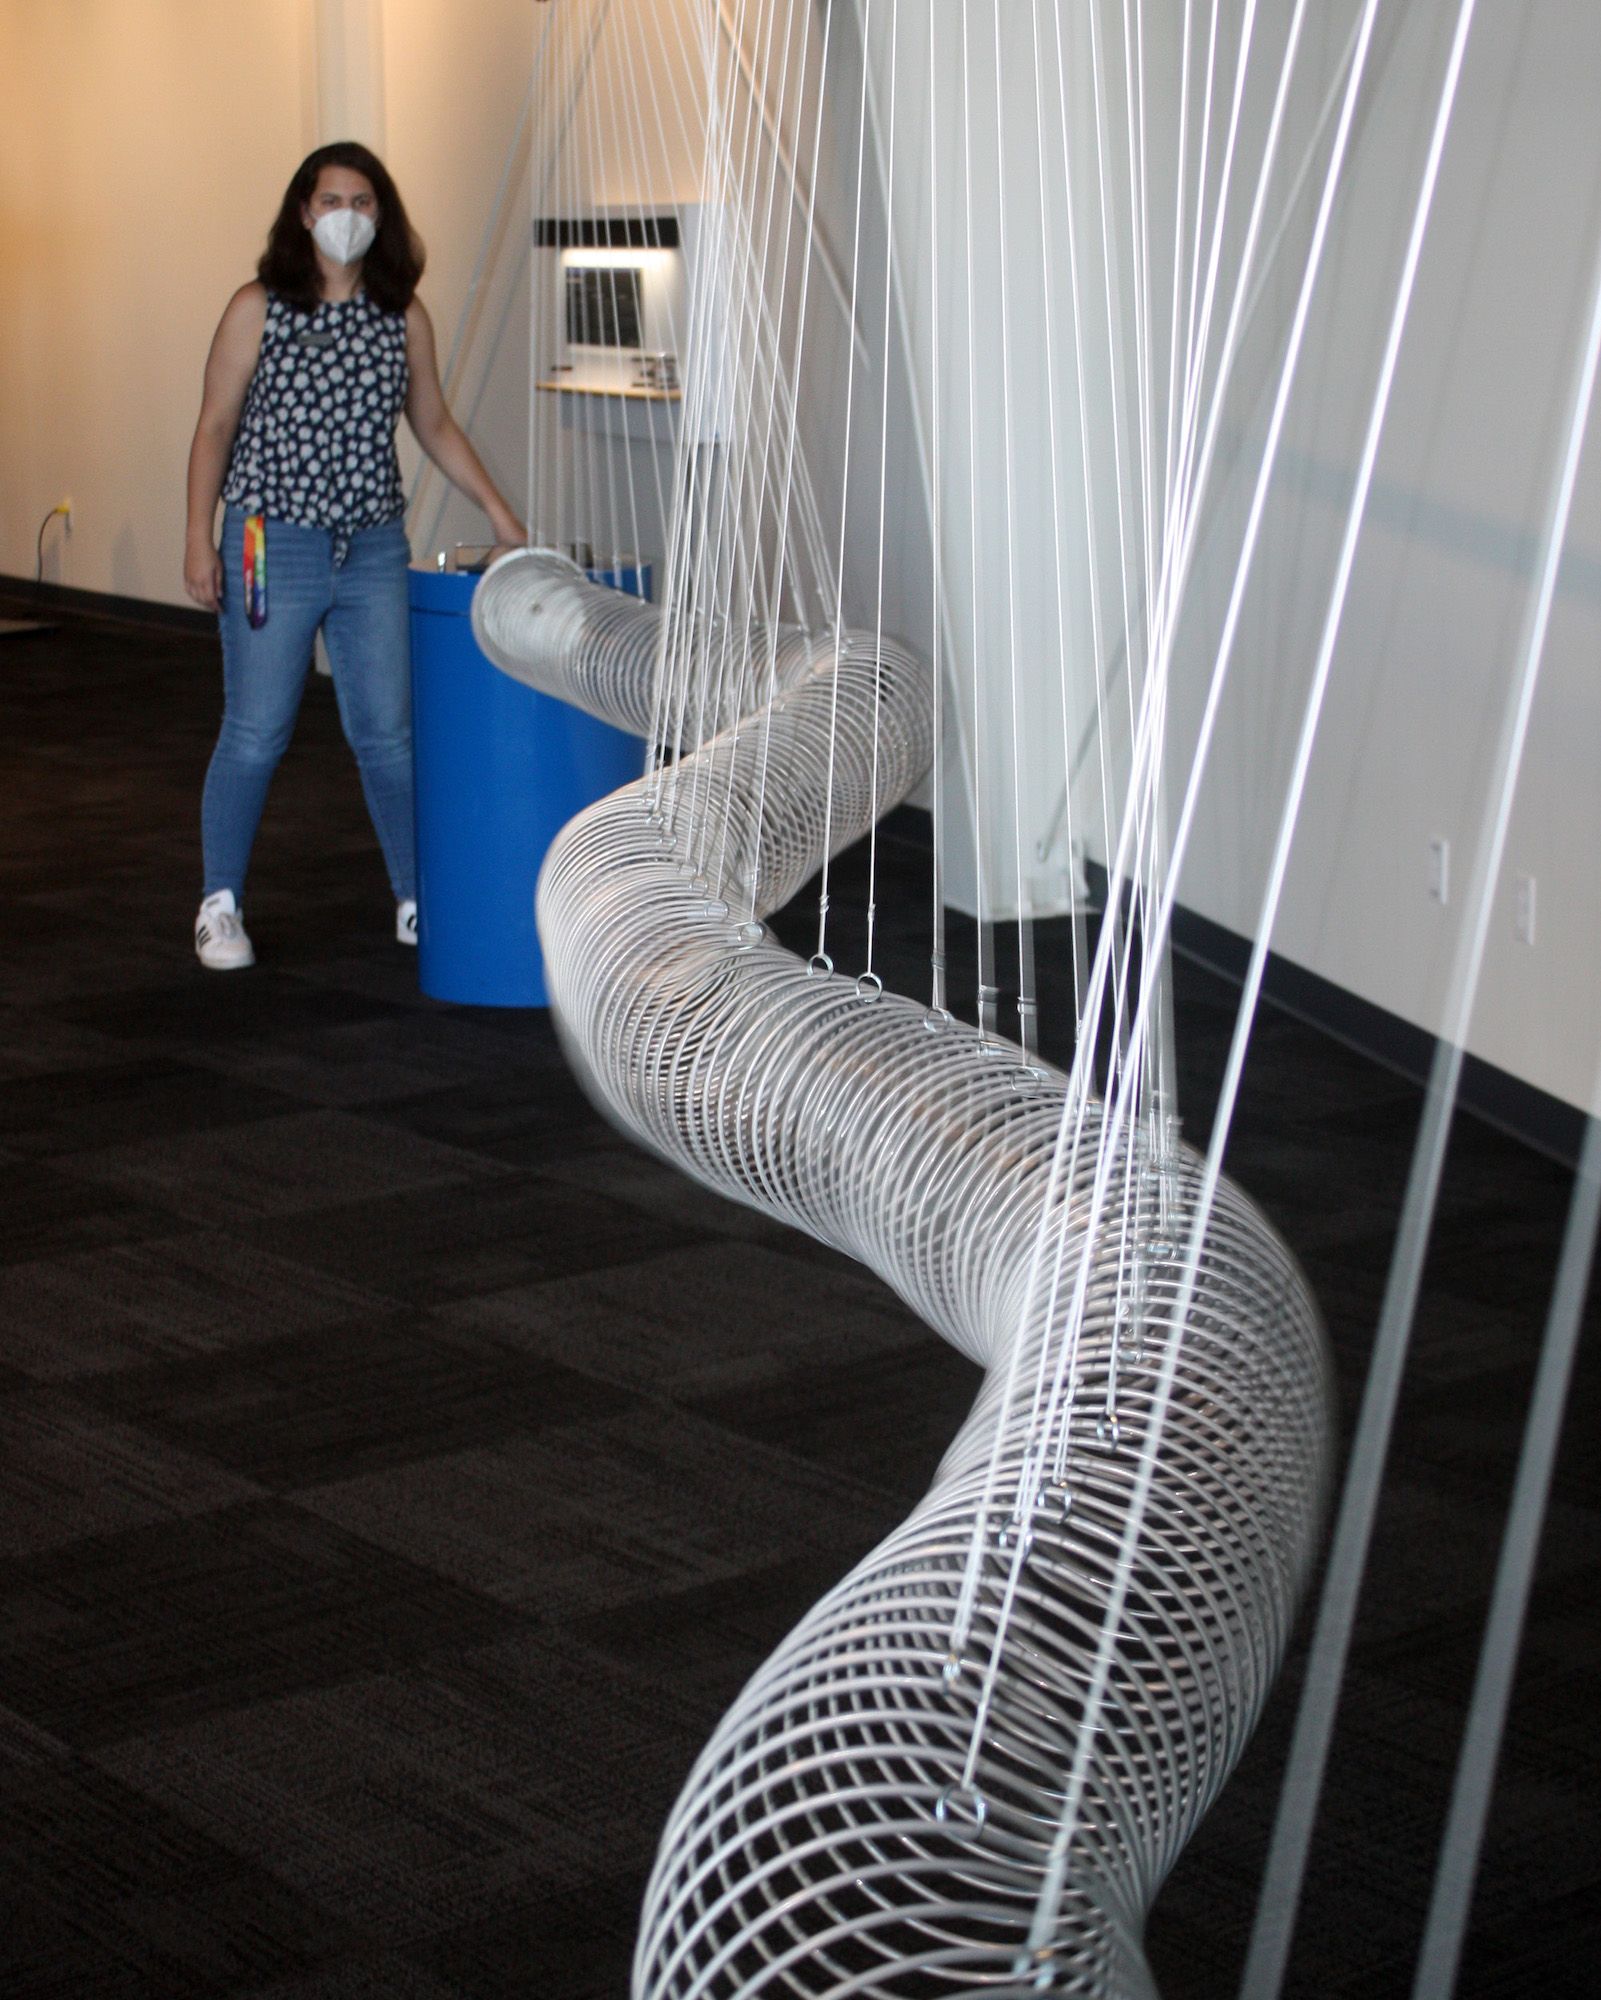 A person stands at the end of a long, suspended Slinky